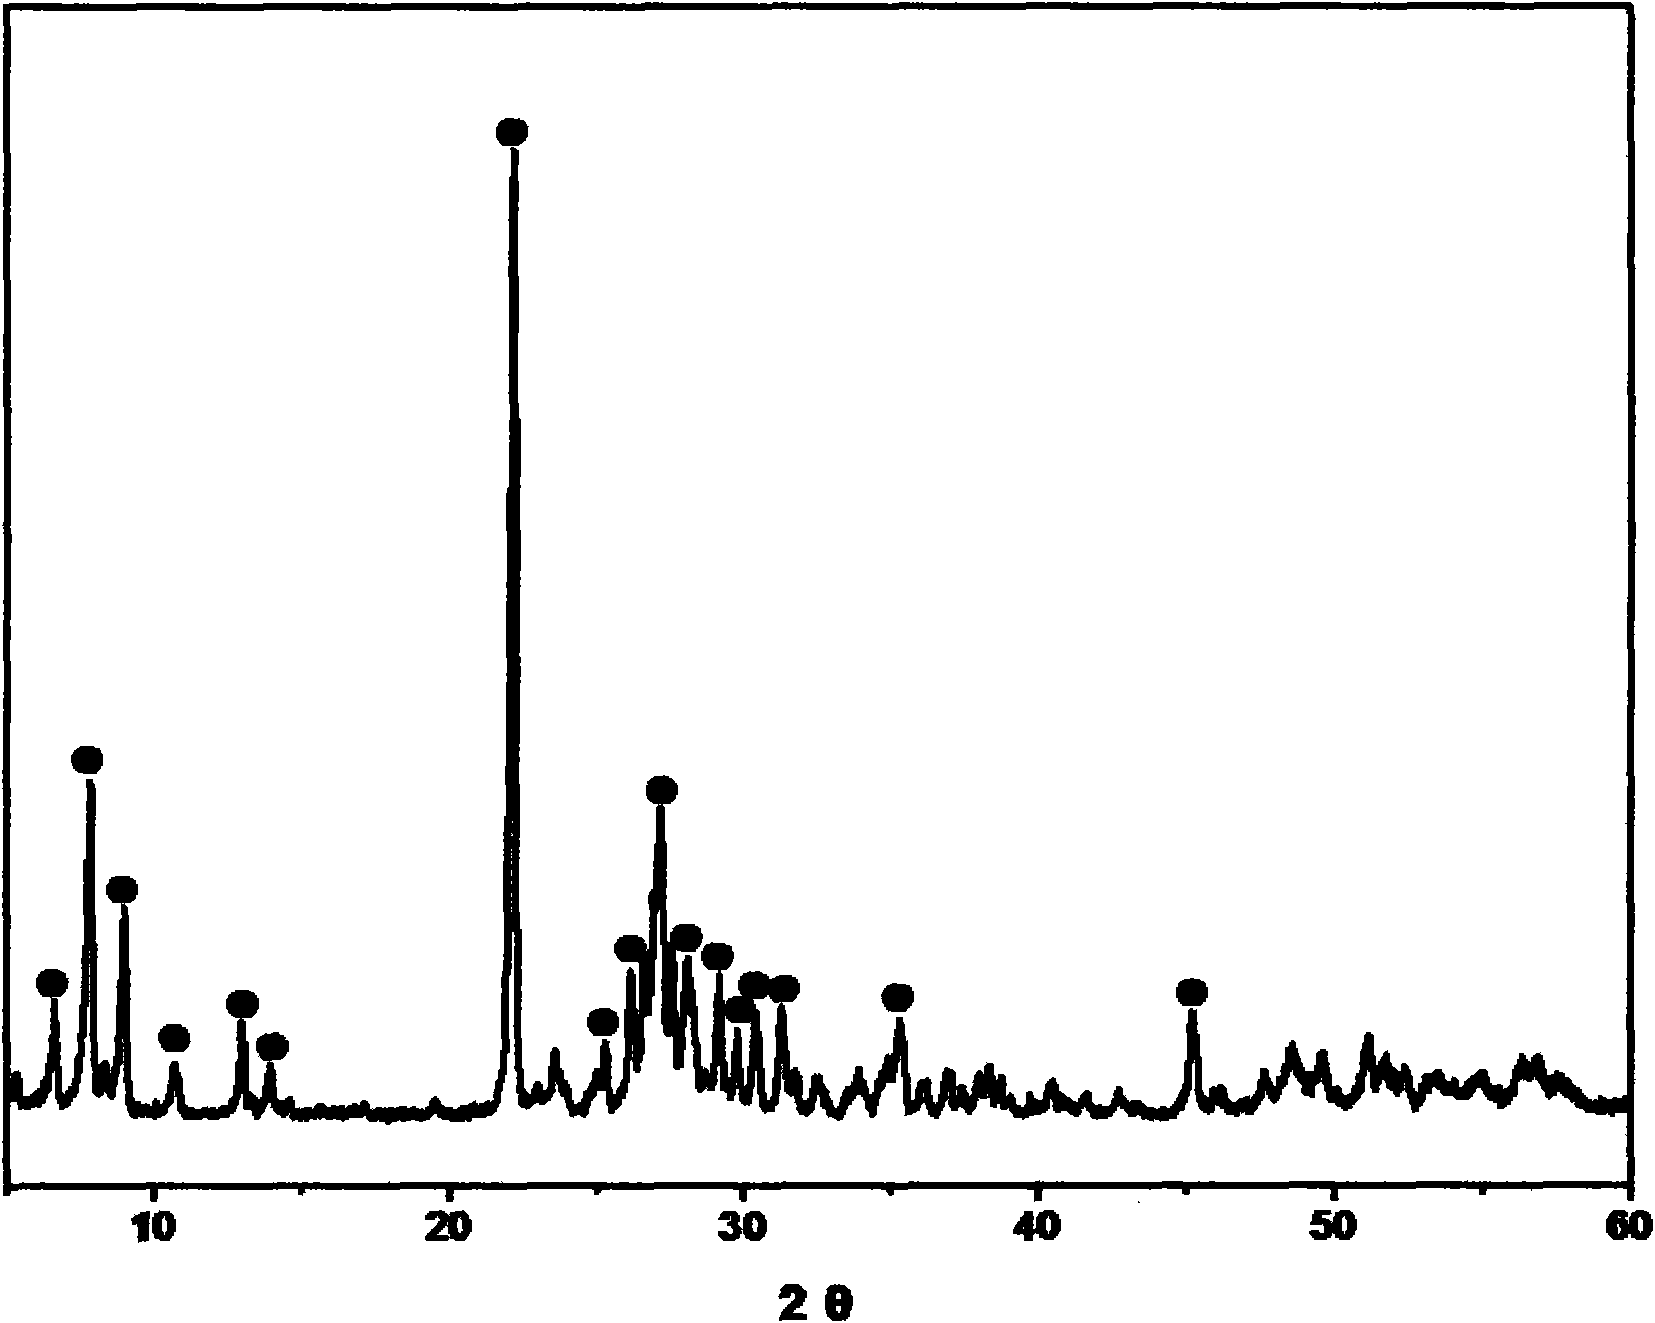 Mo-V-Te-Nb-O catalyst, preparation method and application thereof